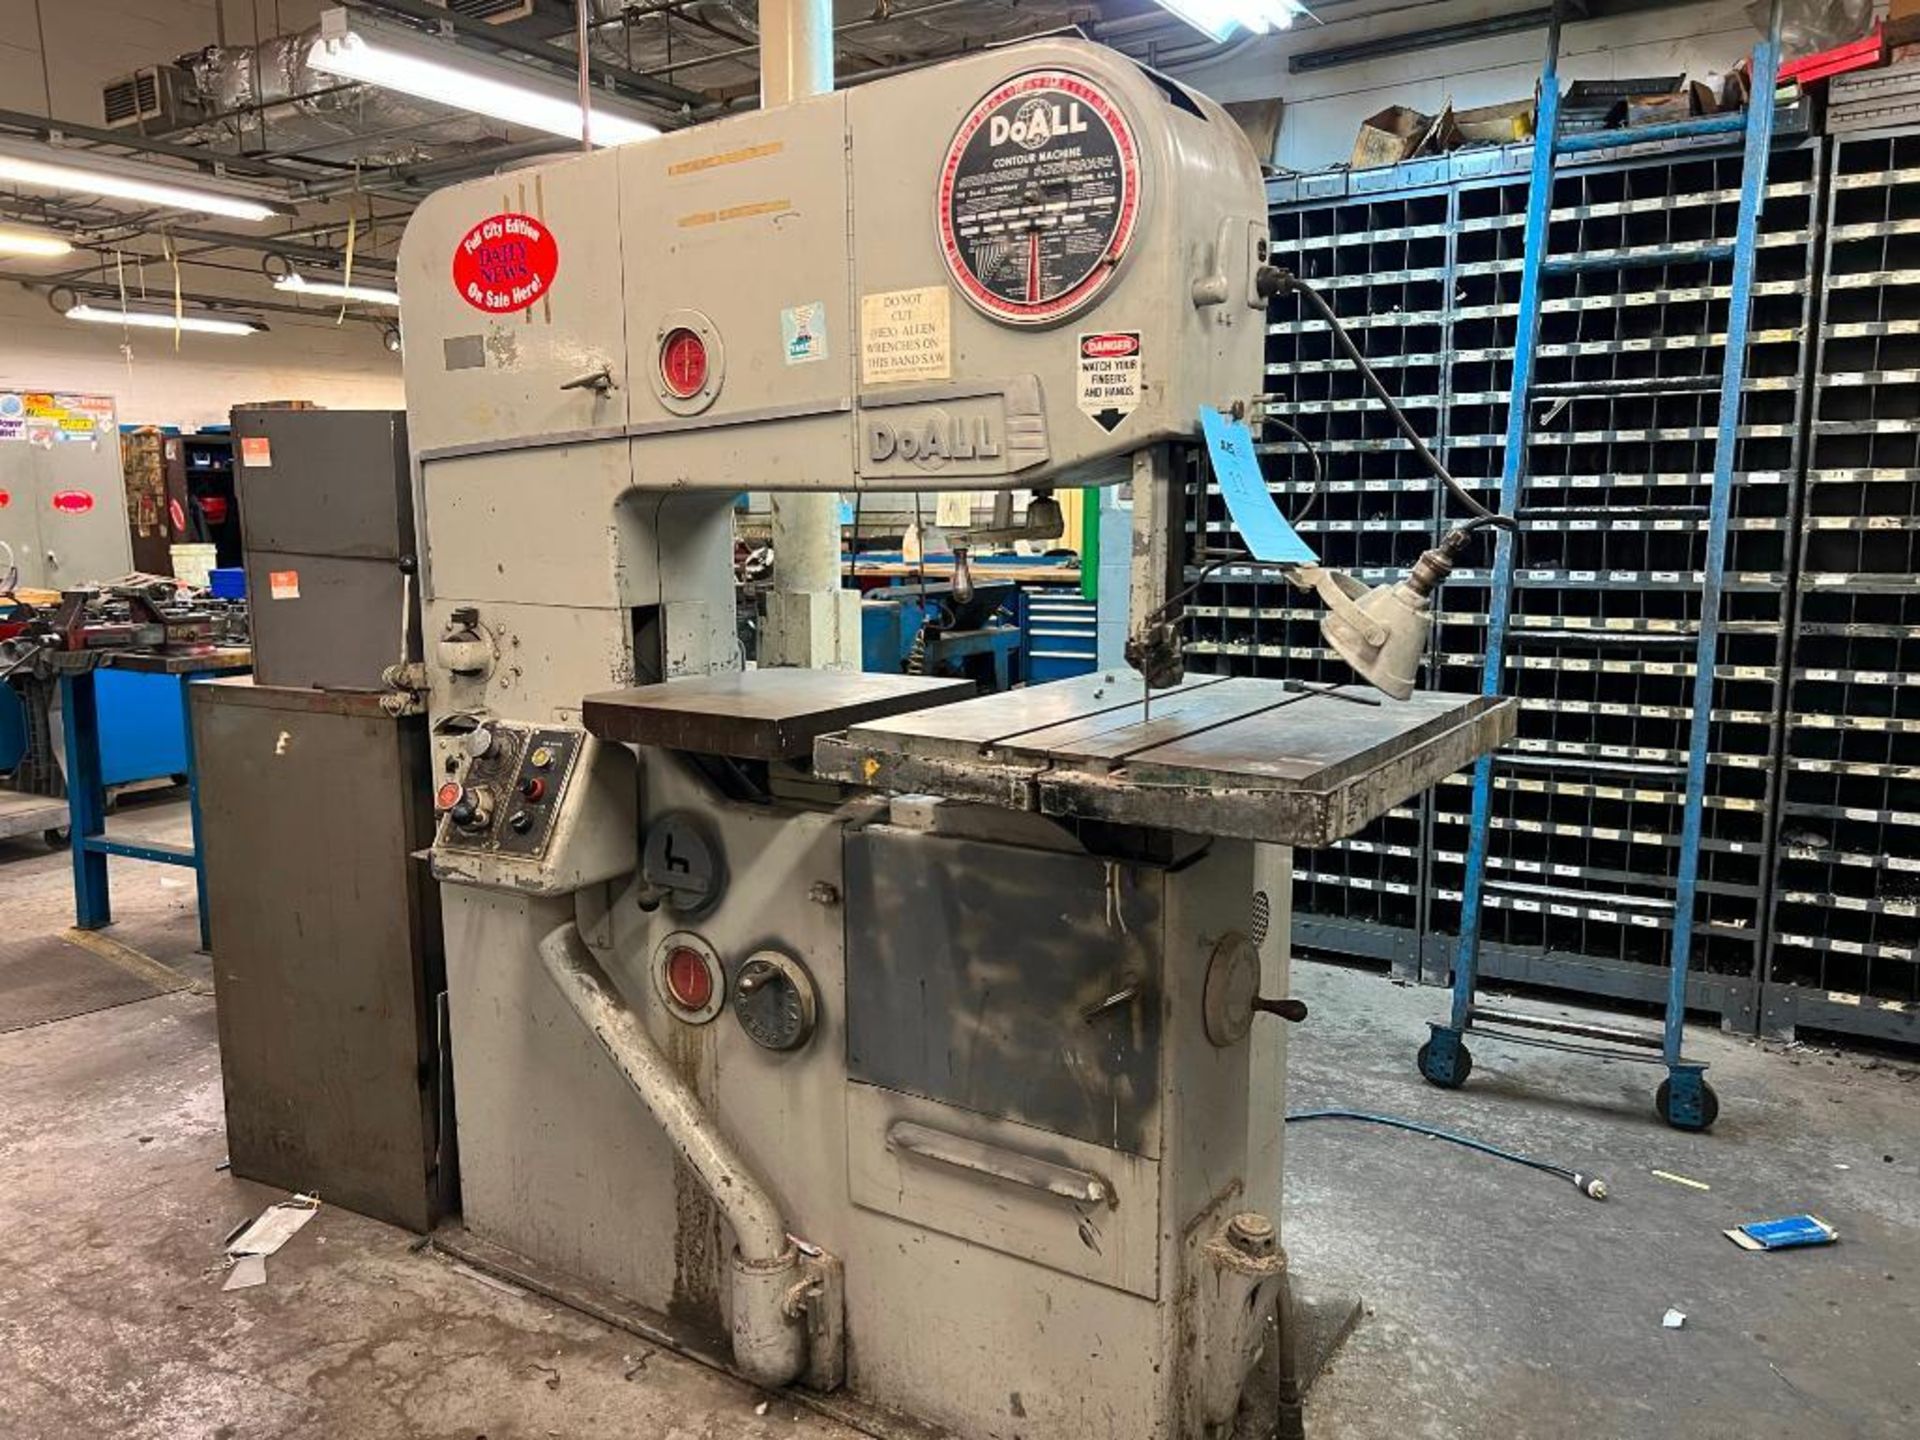 DoAll Vertical Bandsaw Model 3612-3, S/N 153-62571, with extra saw blades